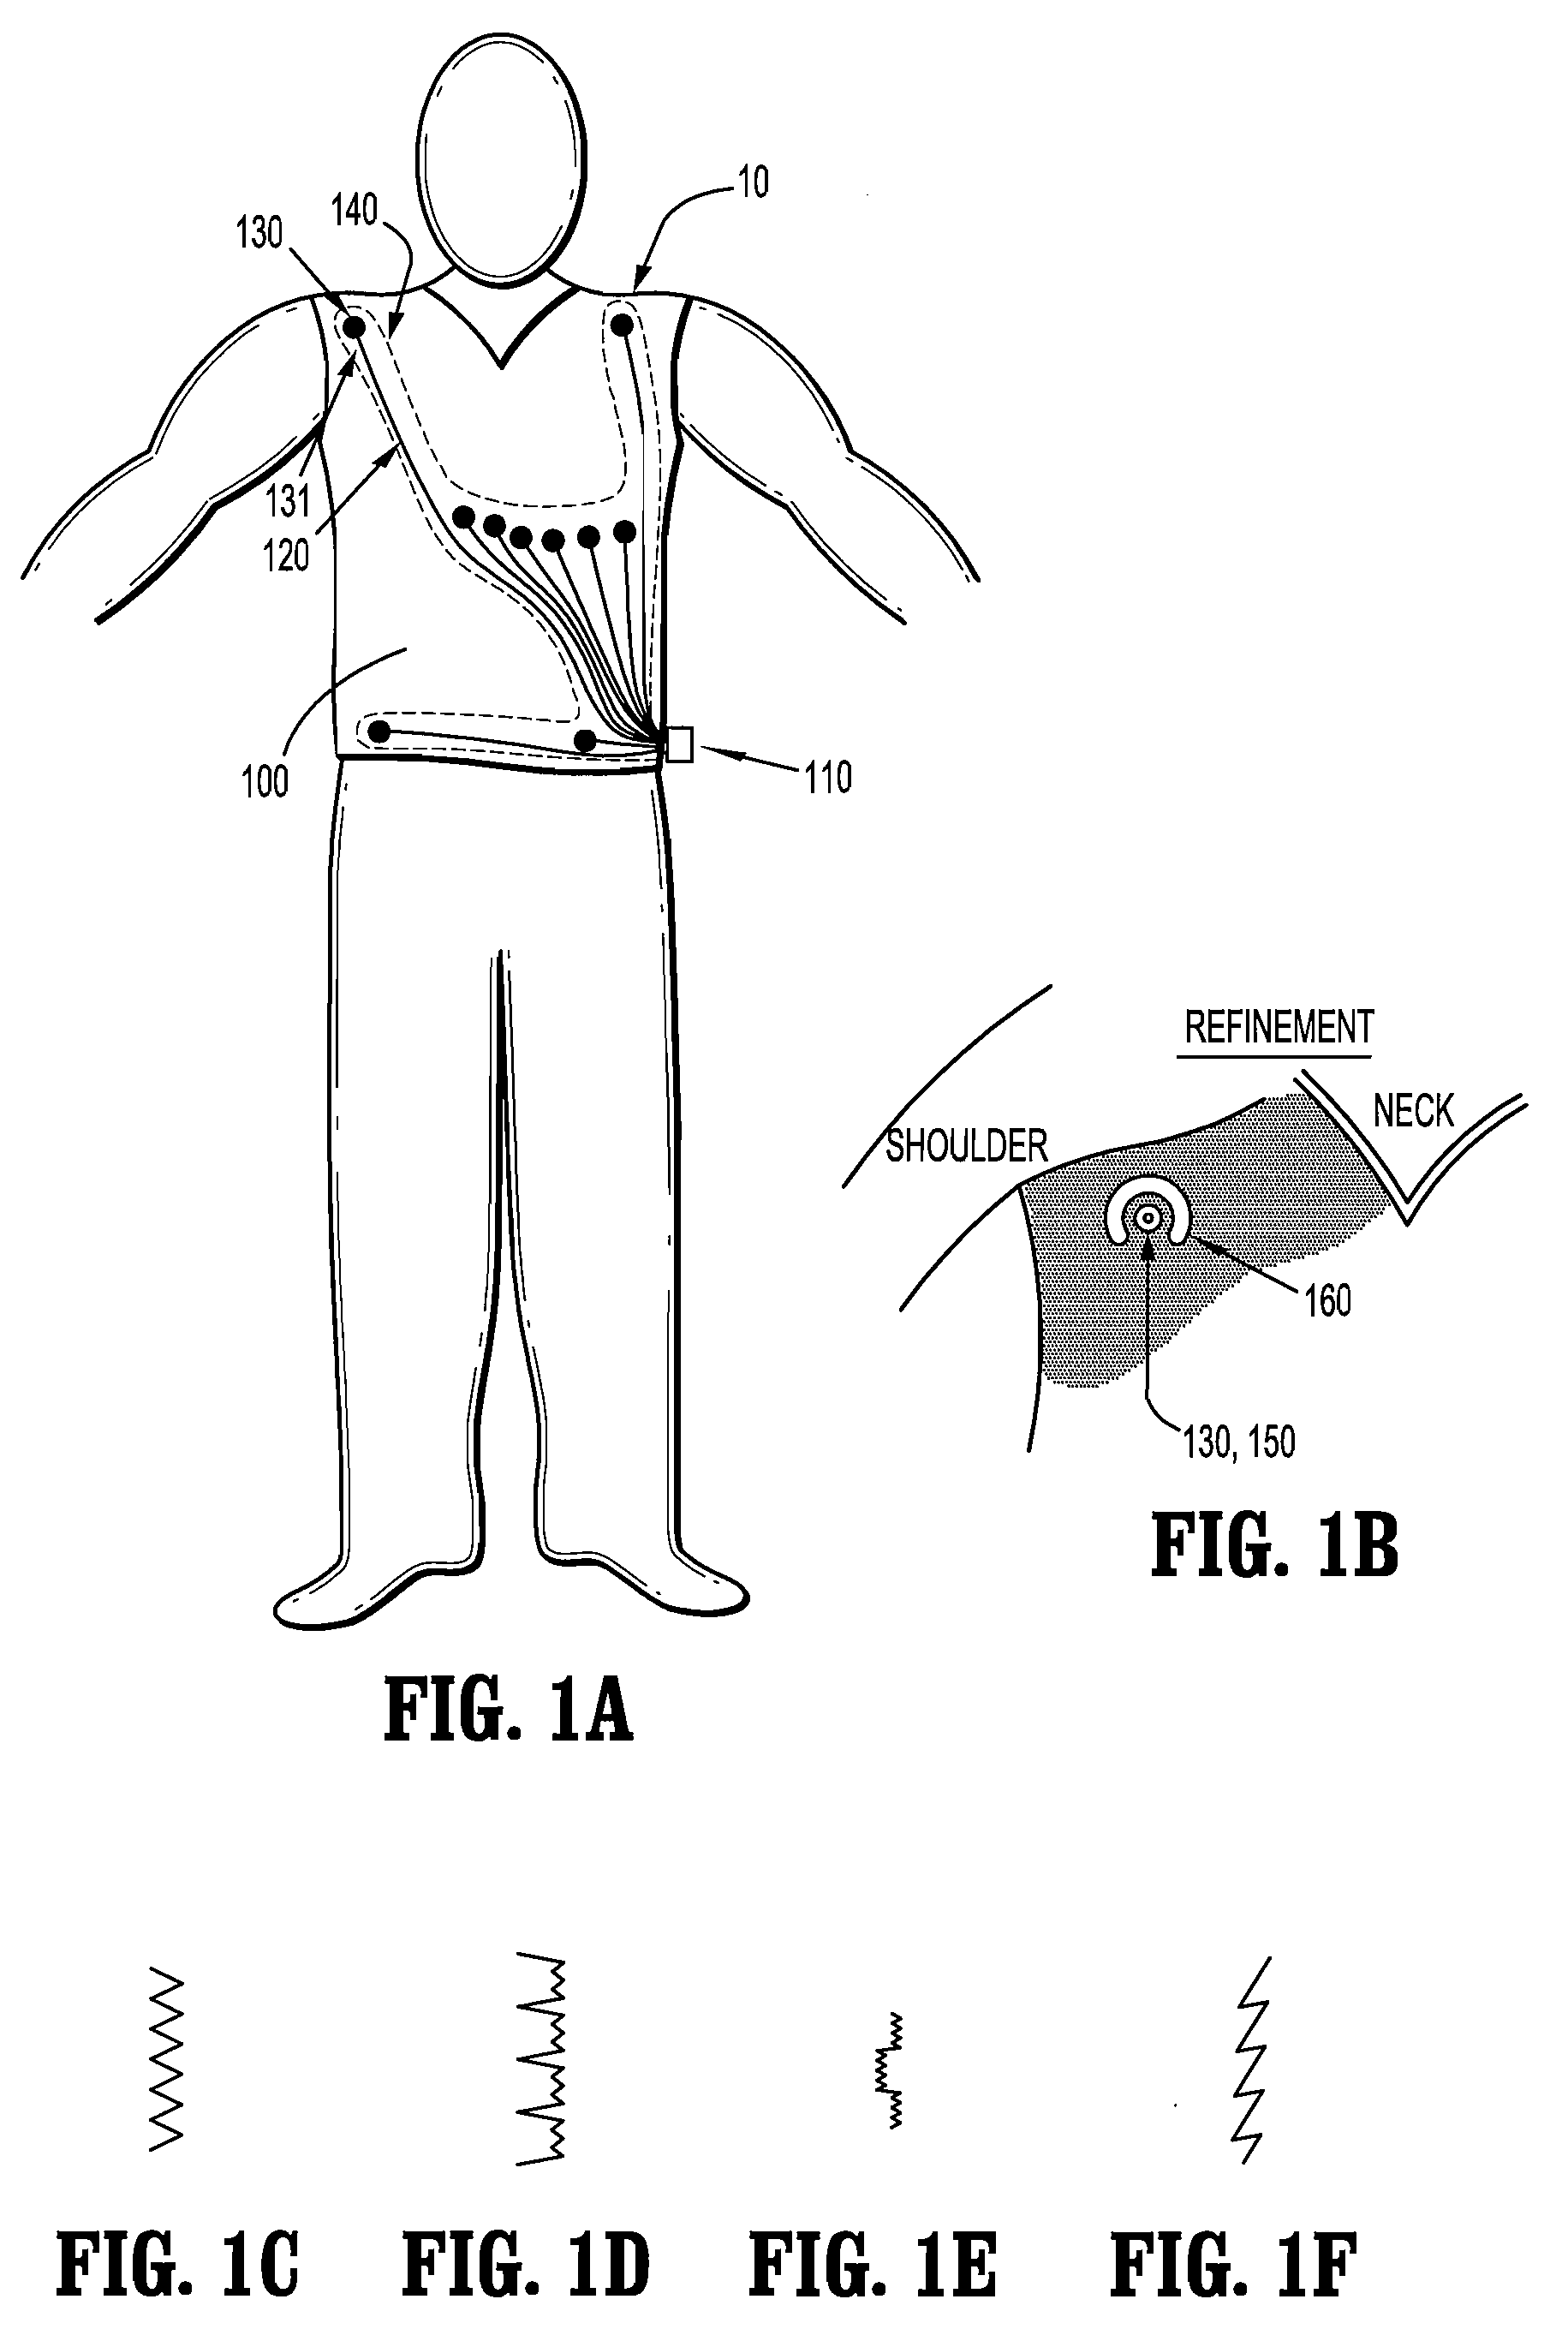 Physiological sensor placement and signal transmission device